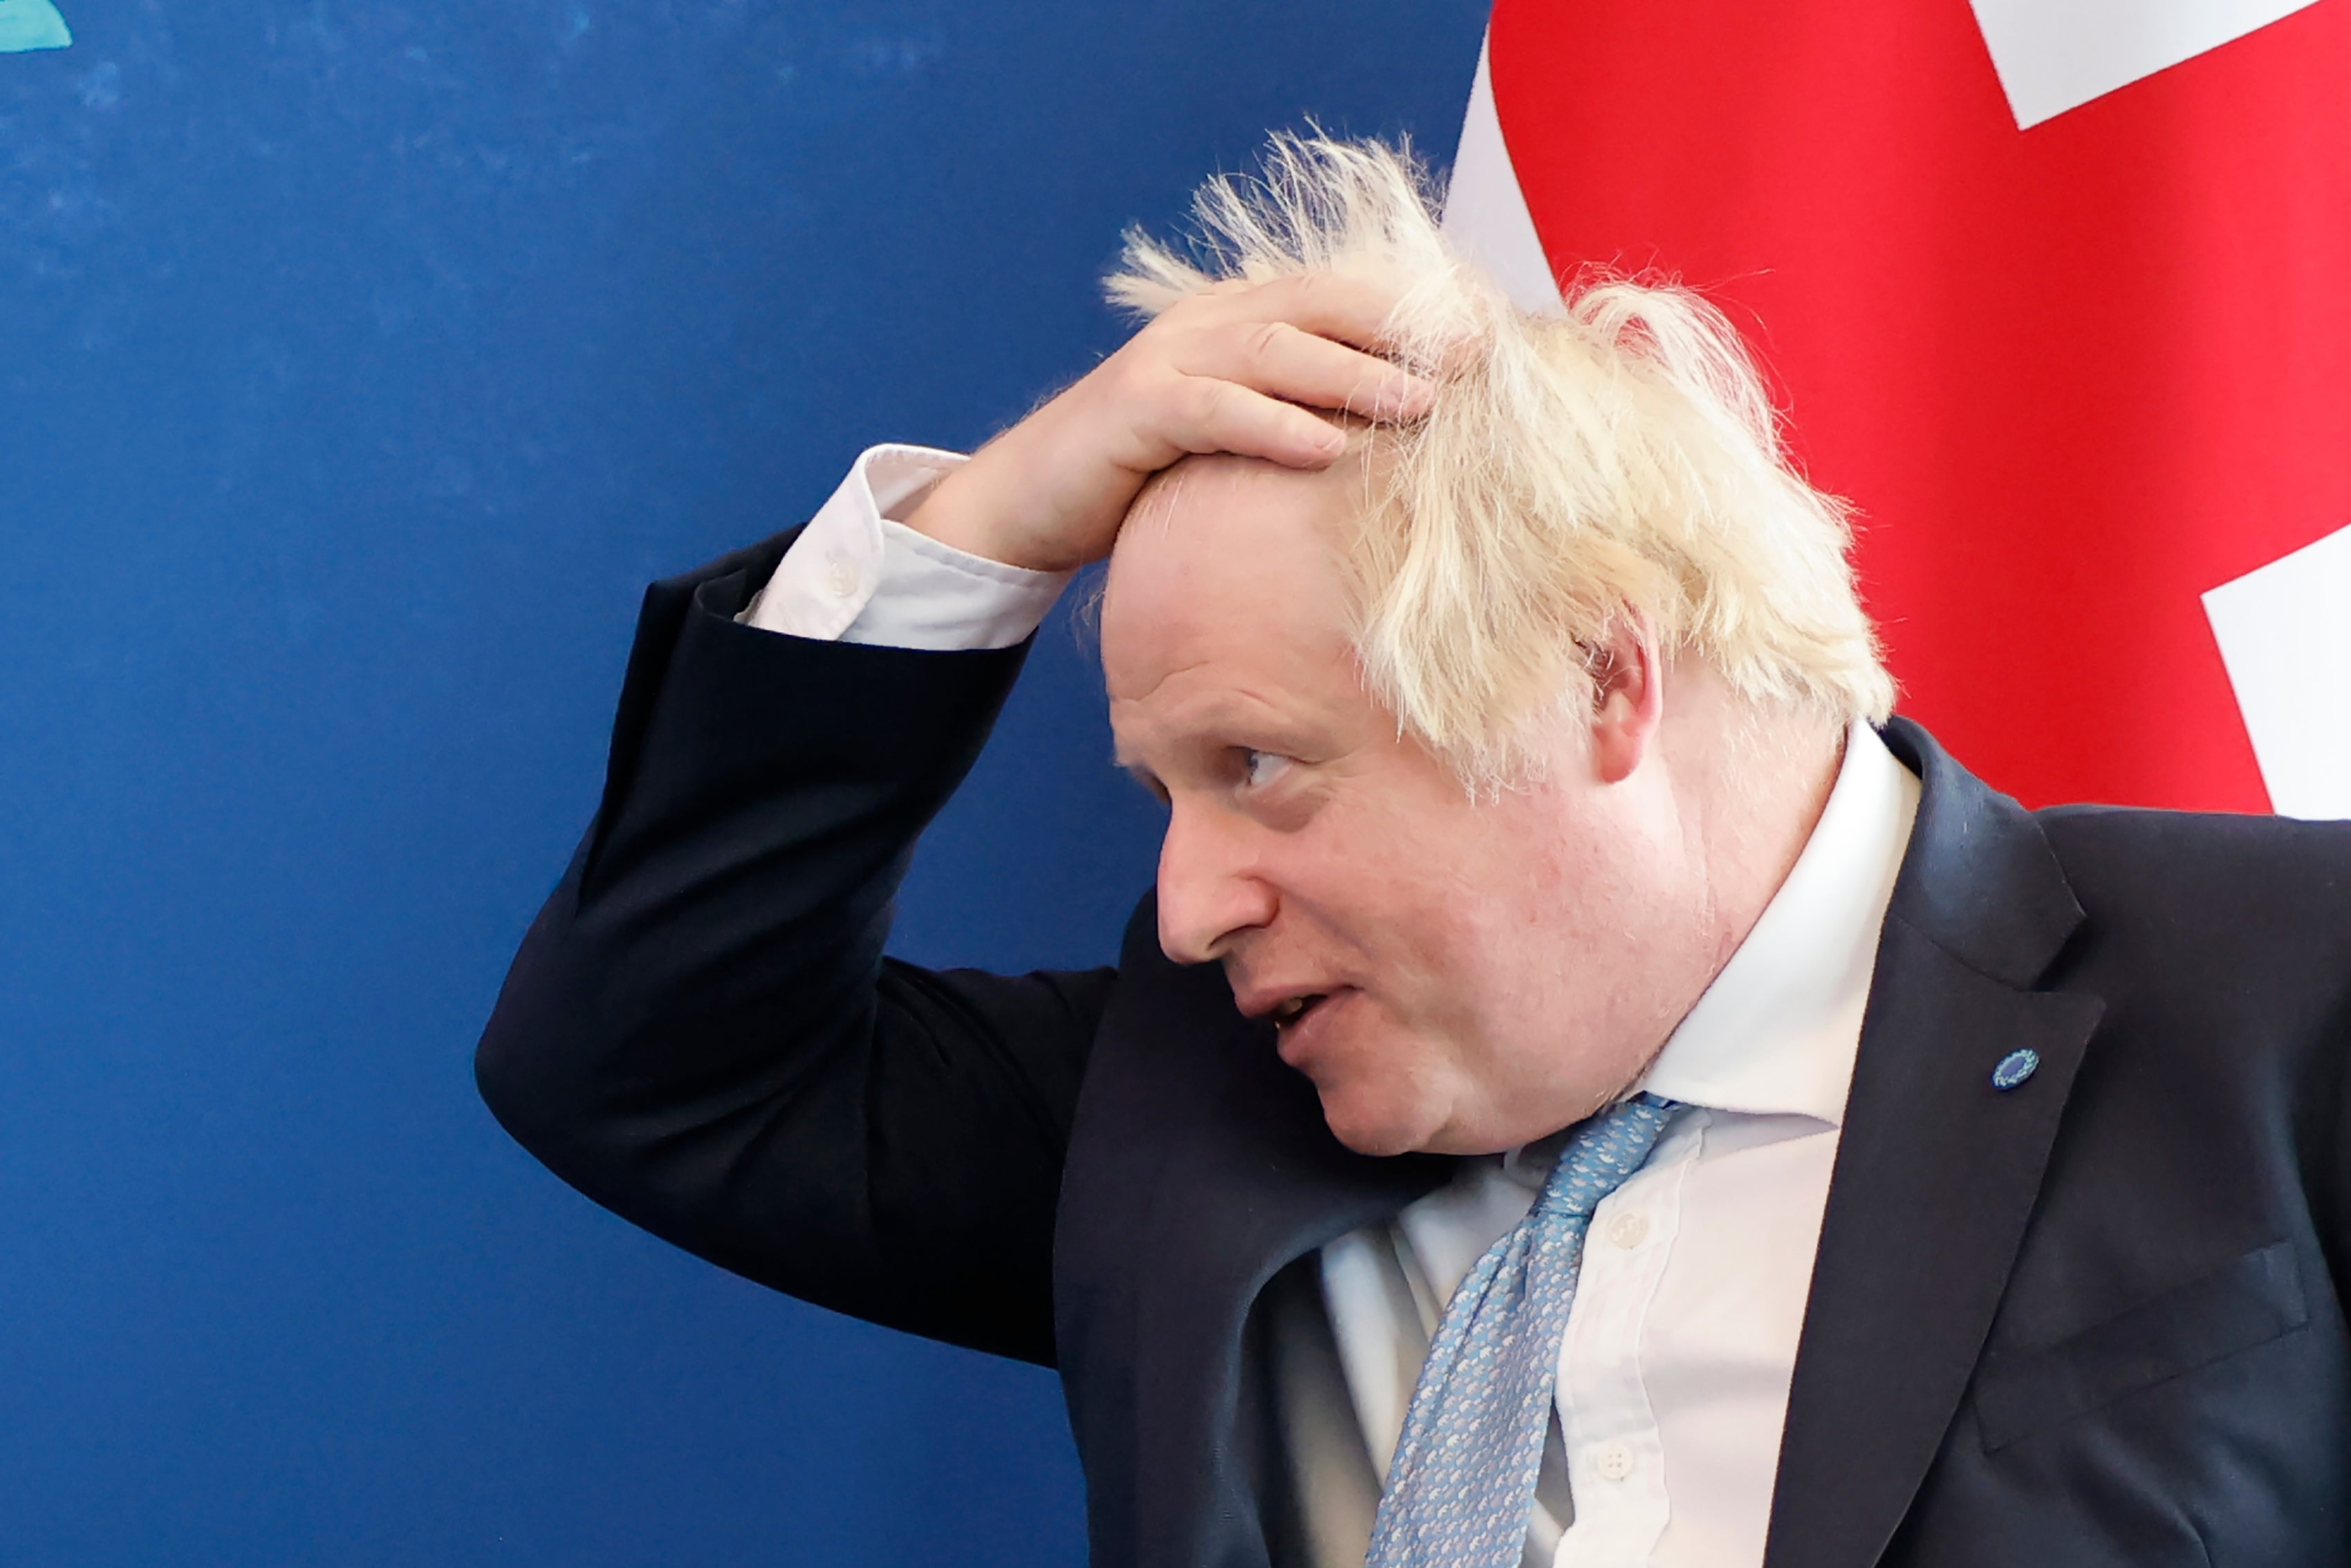 Boris Johnson has been warned that time is running out, but a poll for The Independent found that a majority of UK voters do not trust the PM to reach a deal